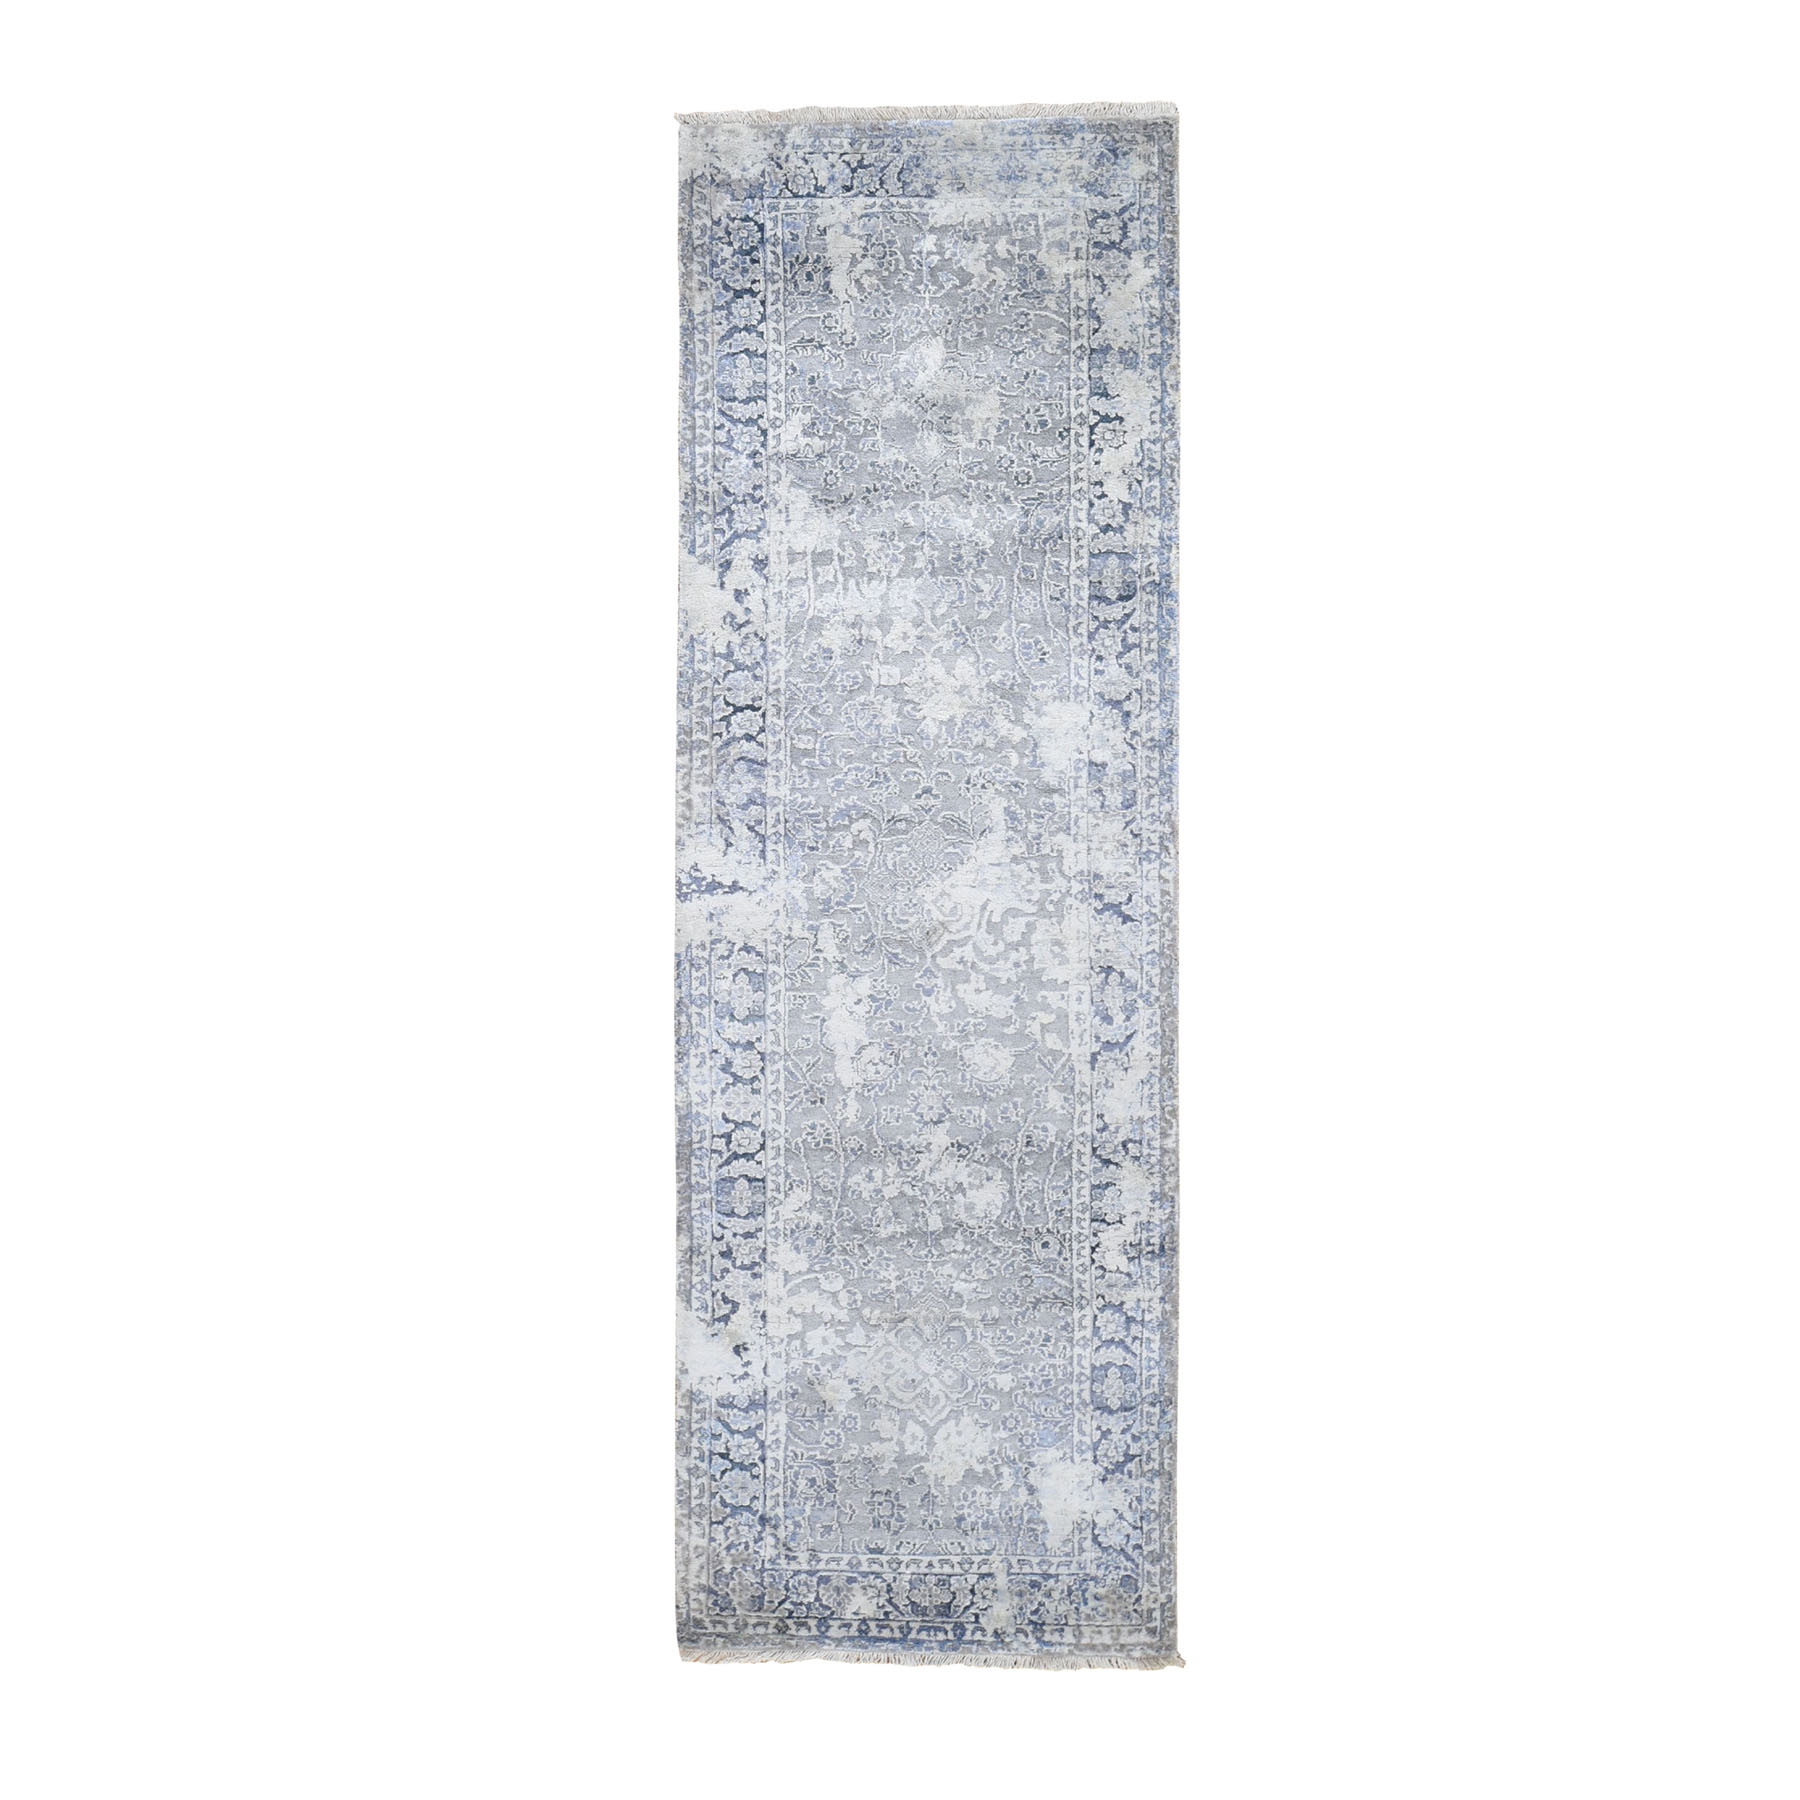 2'5"X8' Gray Broken Persian Design With Pure Silk Runner Hand Knotted Oriental Rug moad80a6